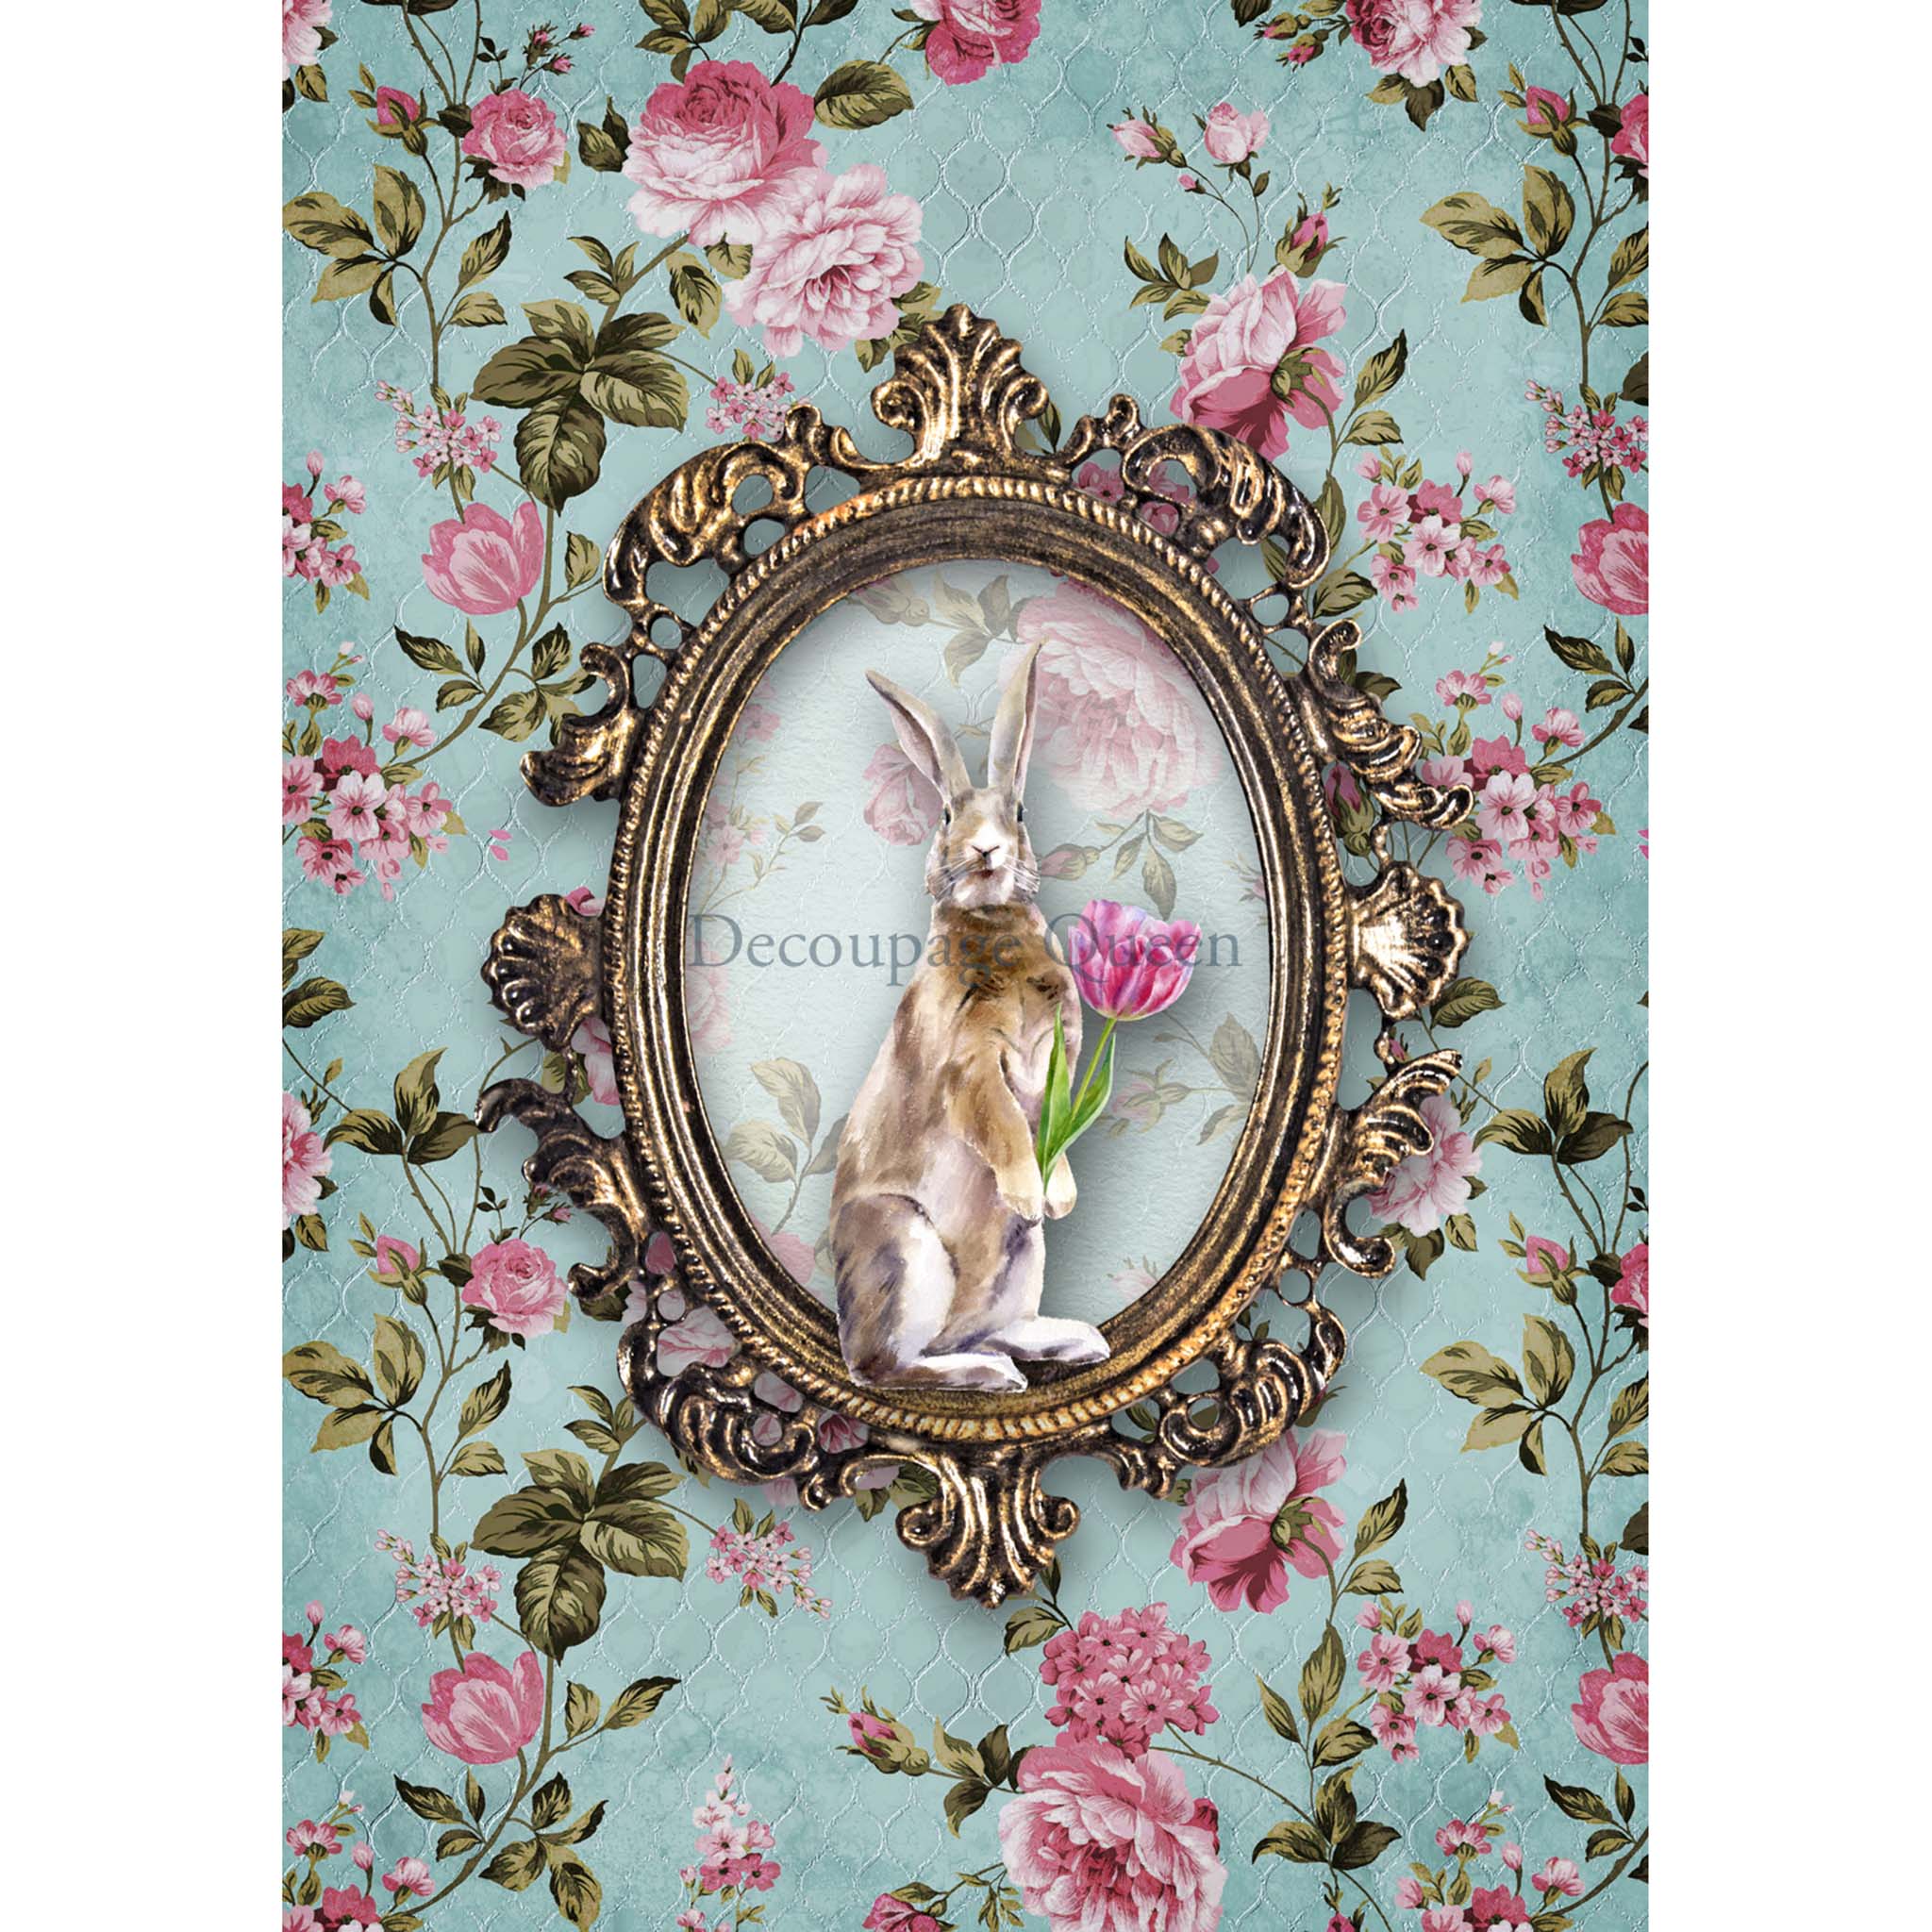 A4 rice paper design that features a charming brown bunny holding a tulip in an ornate frame, surrounded by pink flowers on an aqua background. White borders are on the sides.